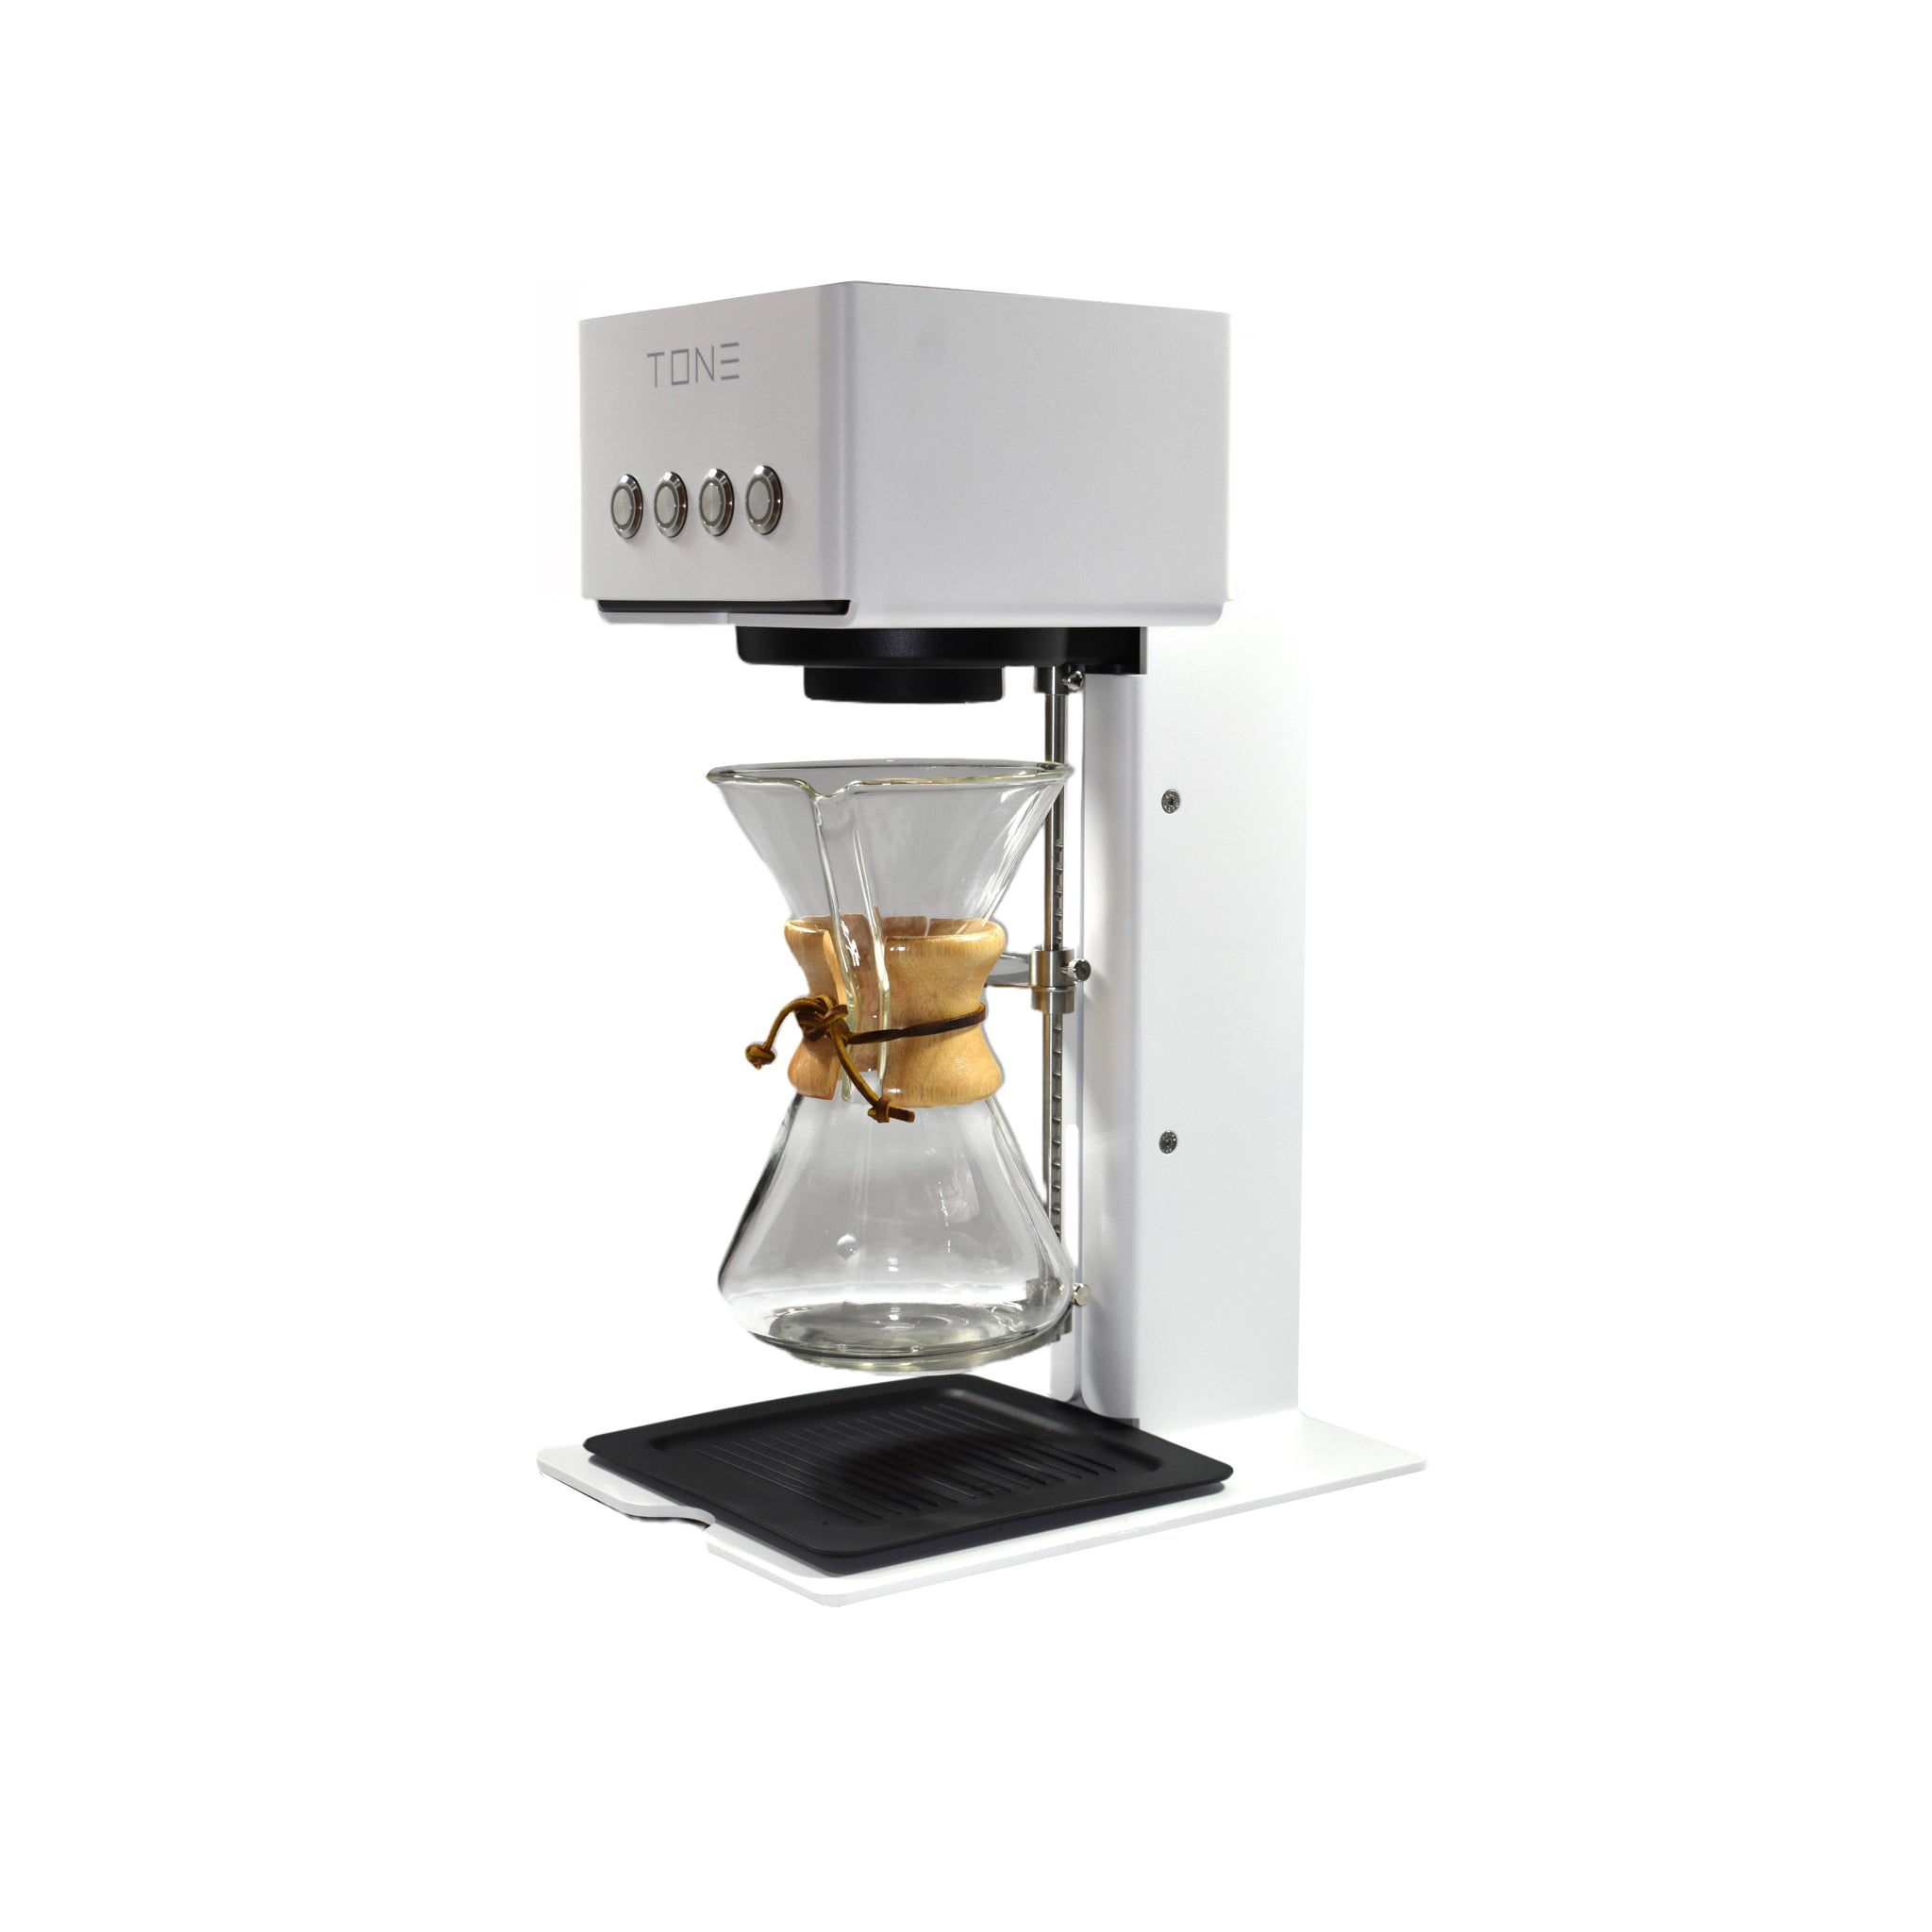 Tone Touch 01 Multifunctional 4-in-1 Batch Coffee Brewer